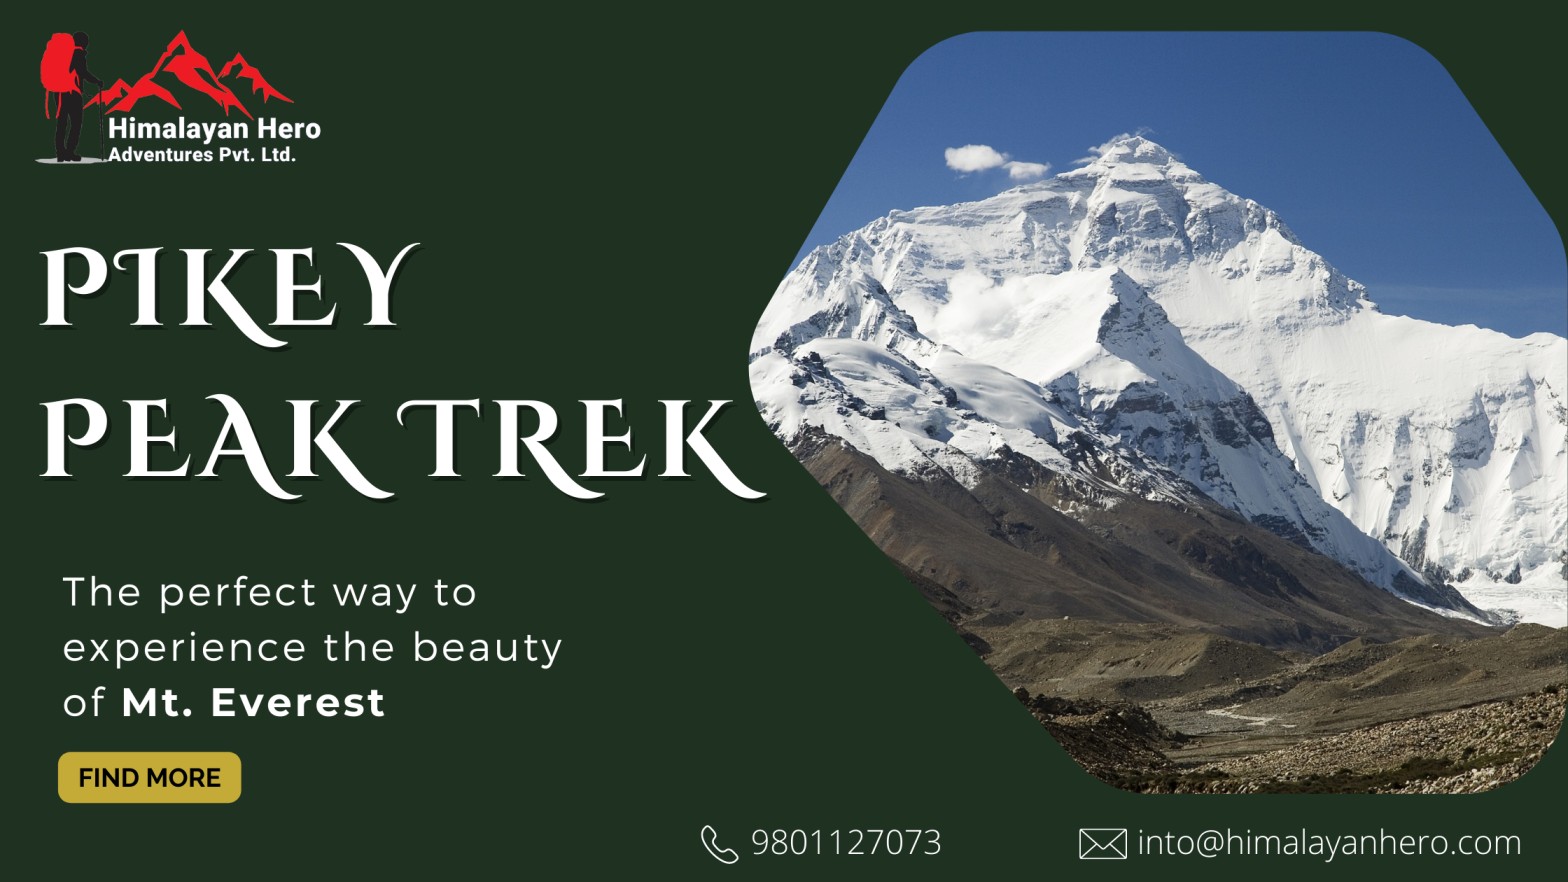 PIKEY PEAK TREK: THE PERFECT WAY TO EXPERIENCE THE BEAUTY OF MT. EVEREST